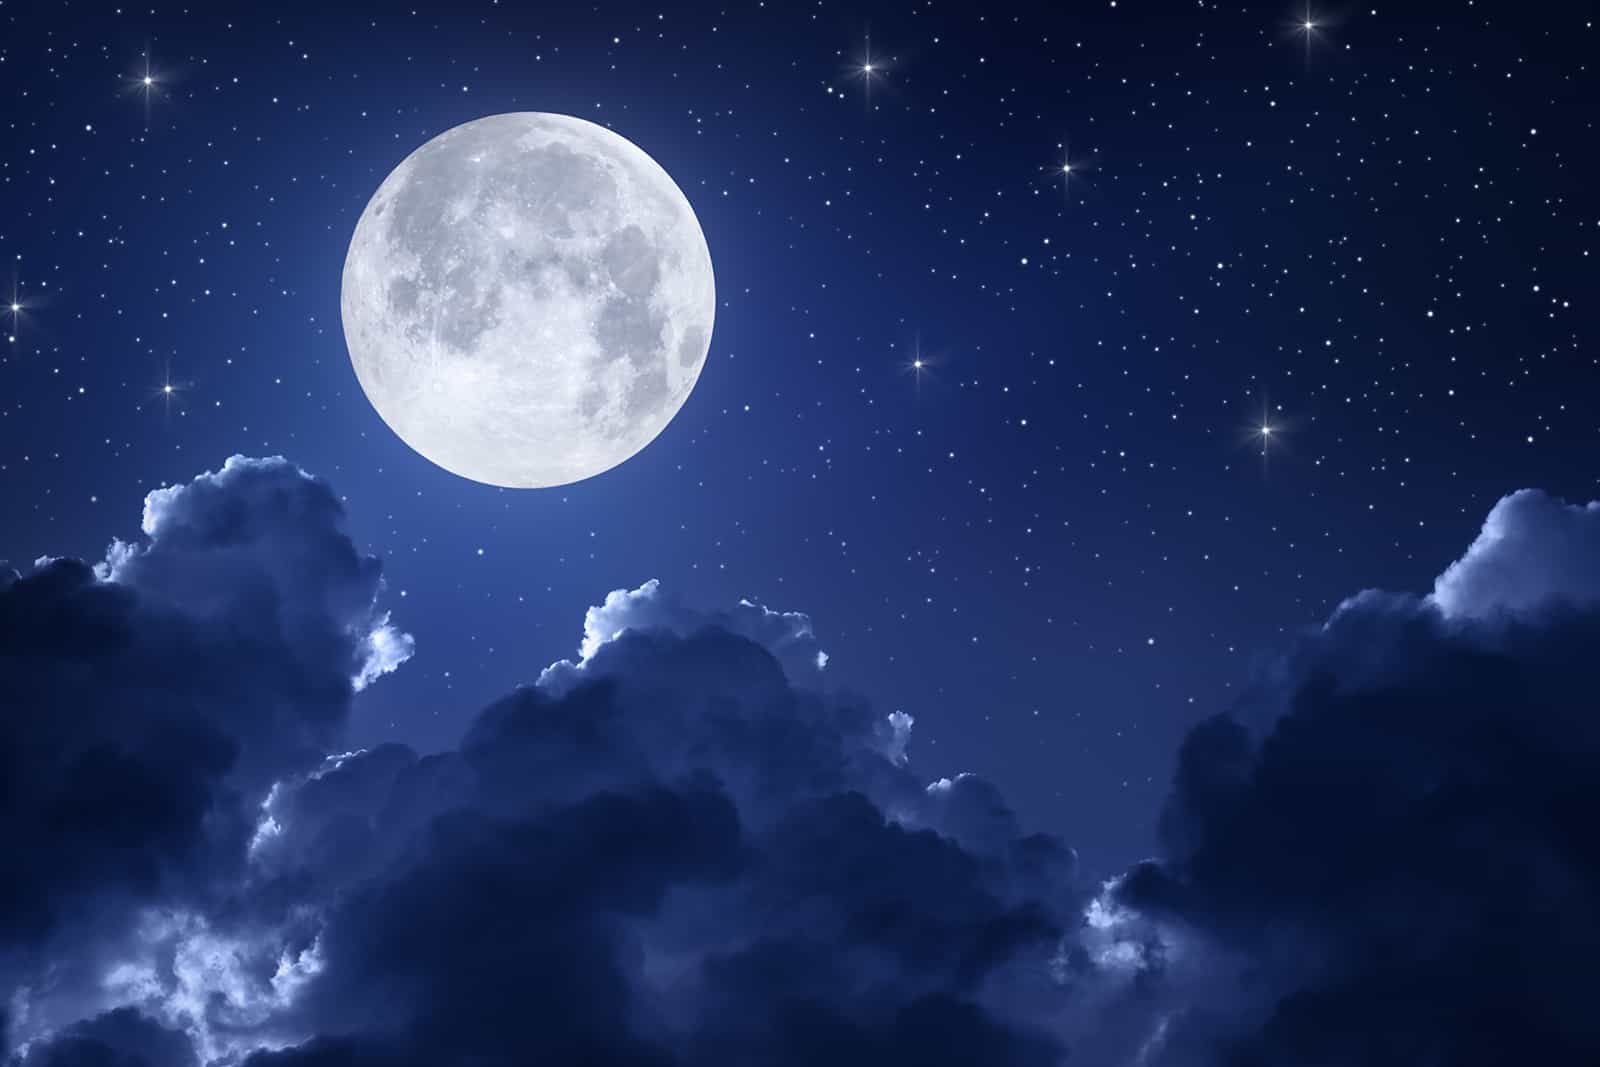 Bright full moon, clouds, and stars in a dark blue night sky.